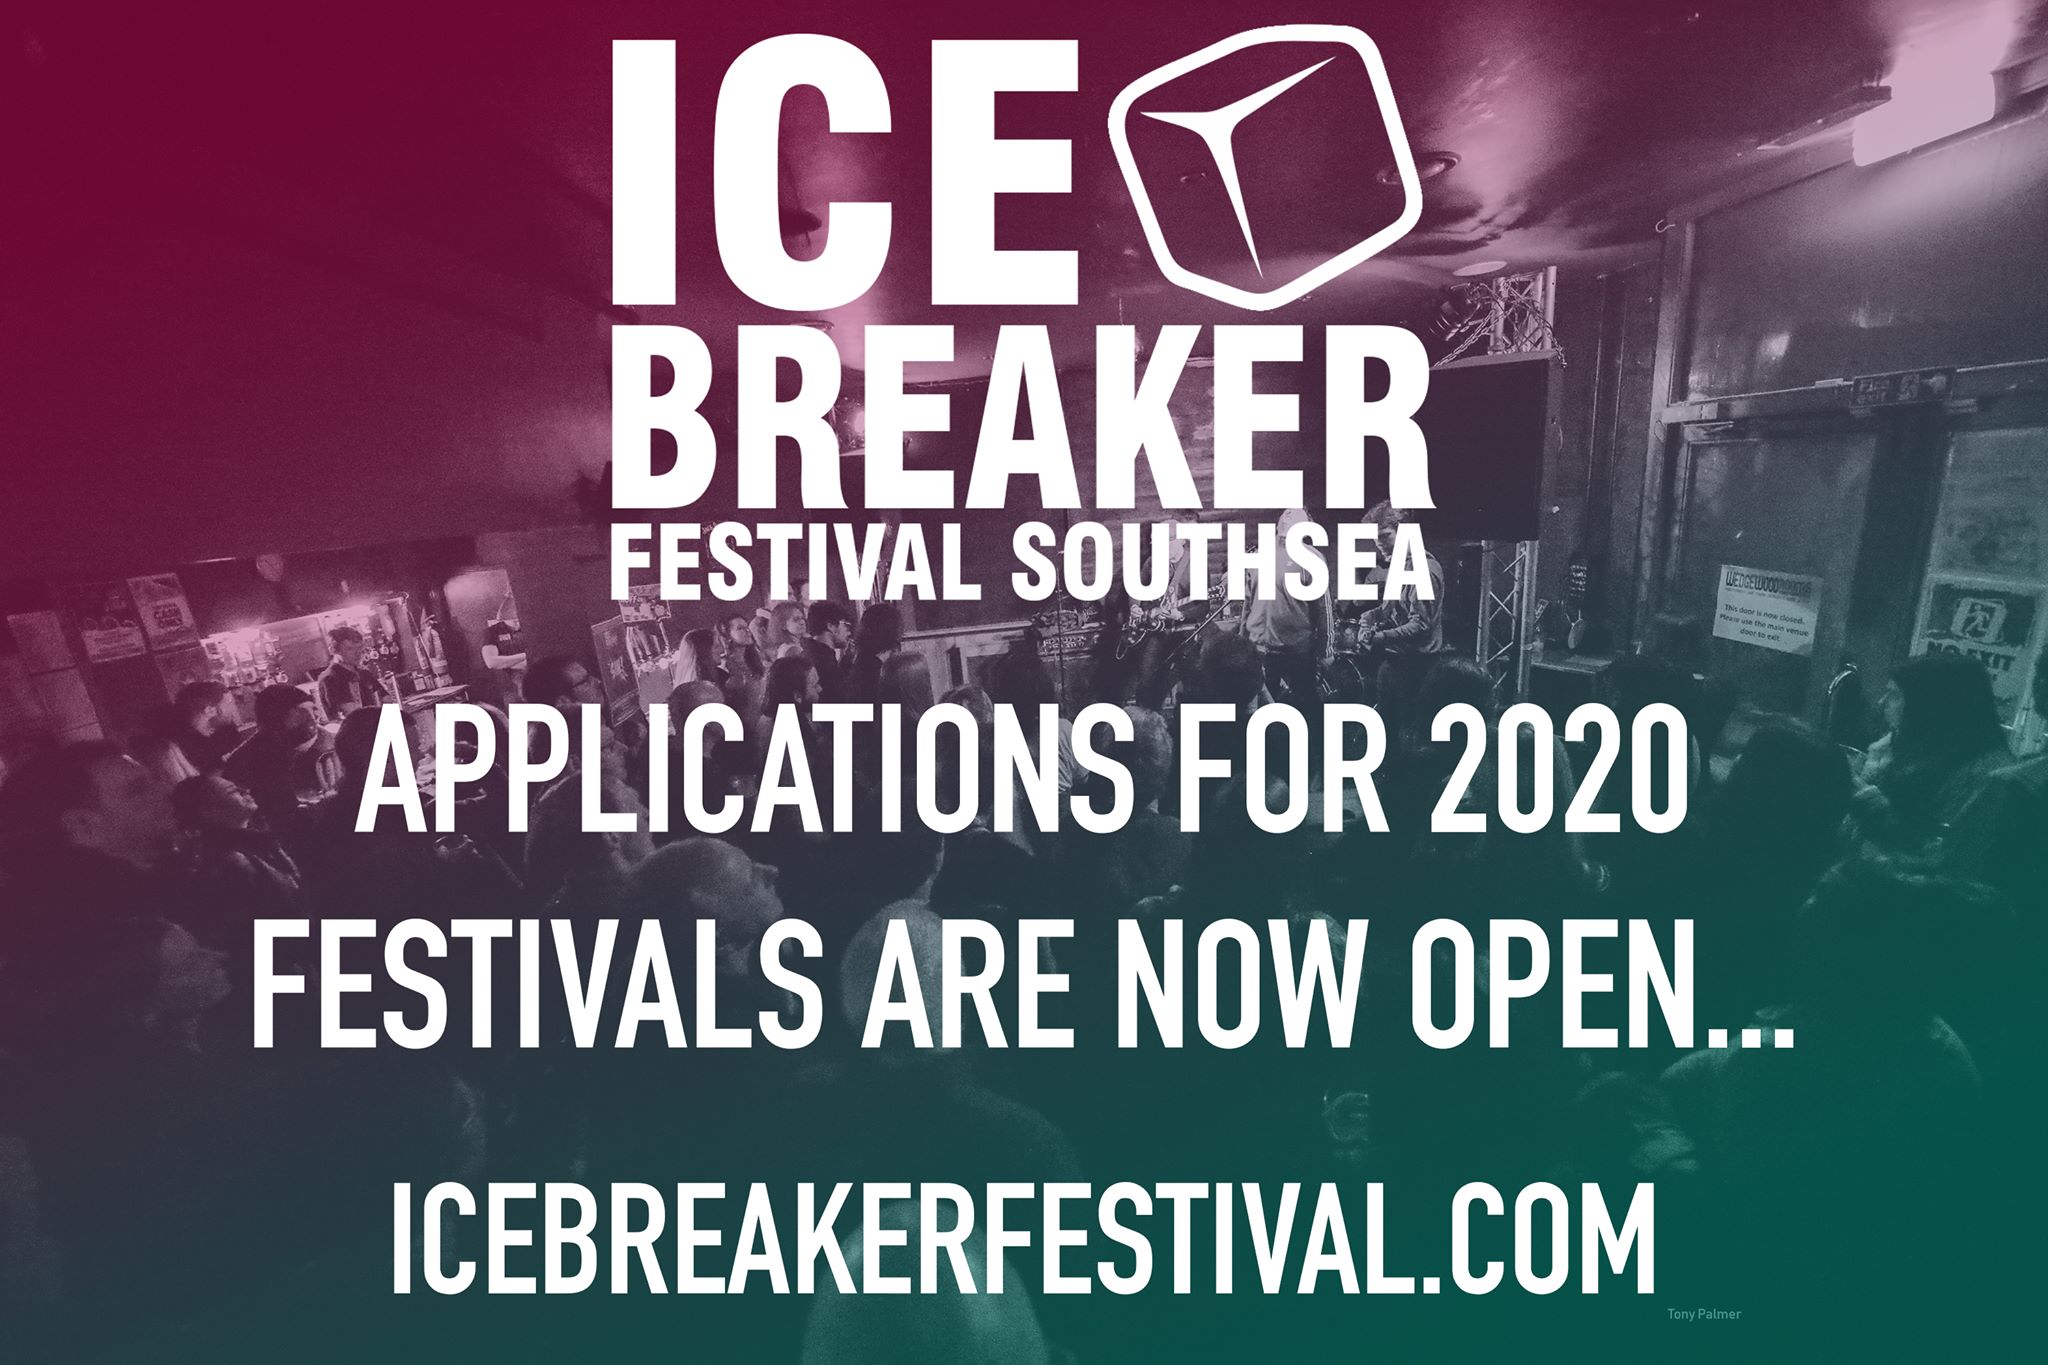 Applications open to play at Icebreaker Festival News The Unsigned